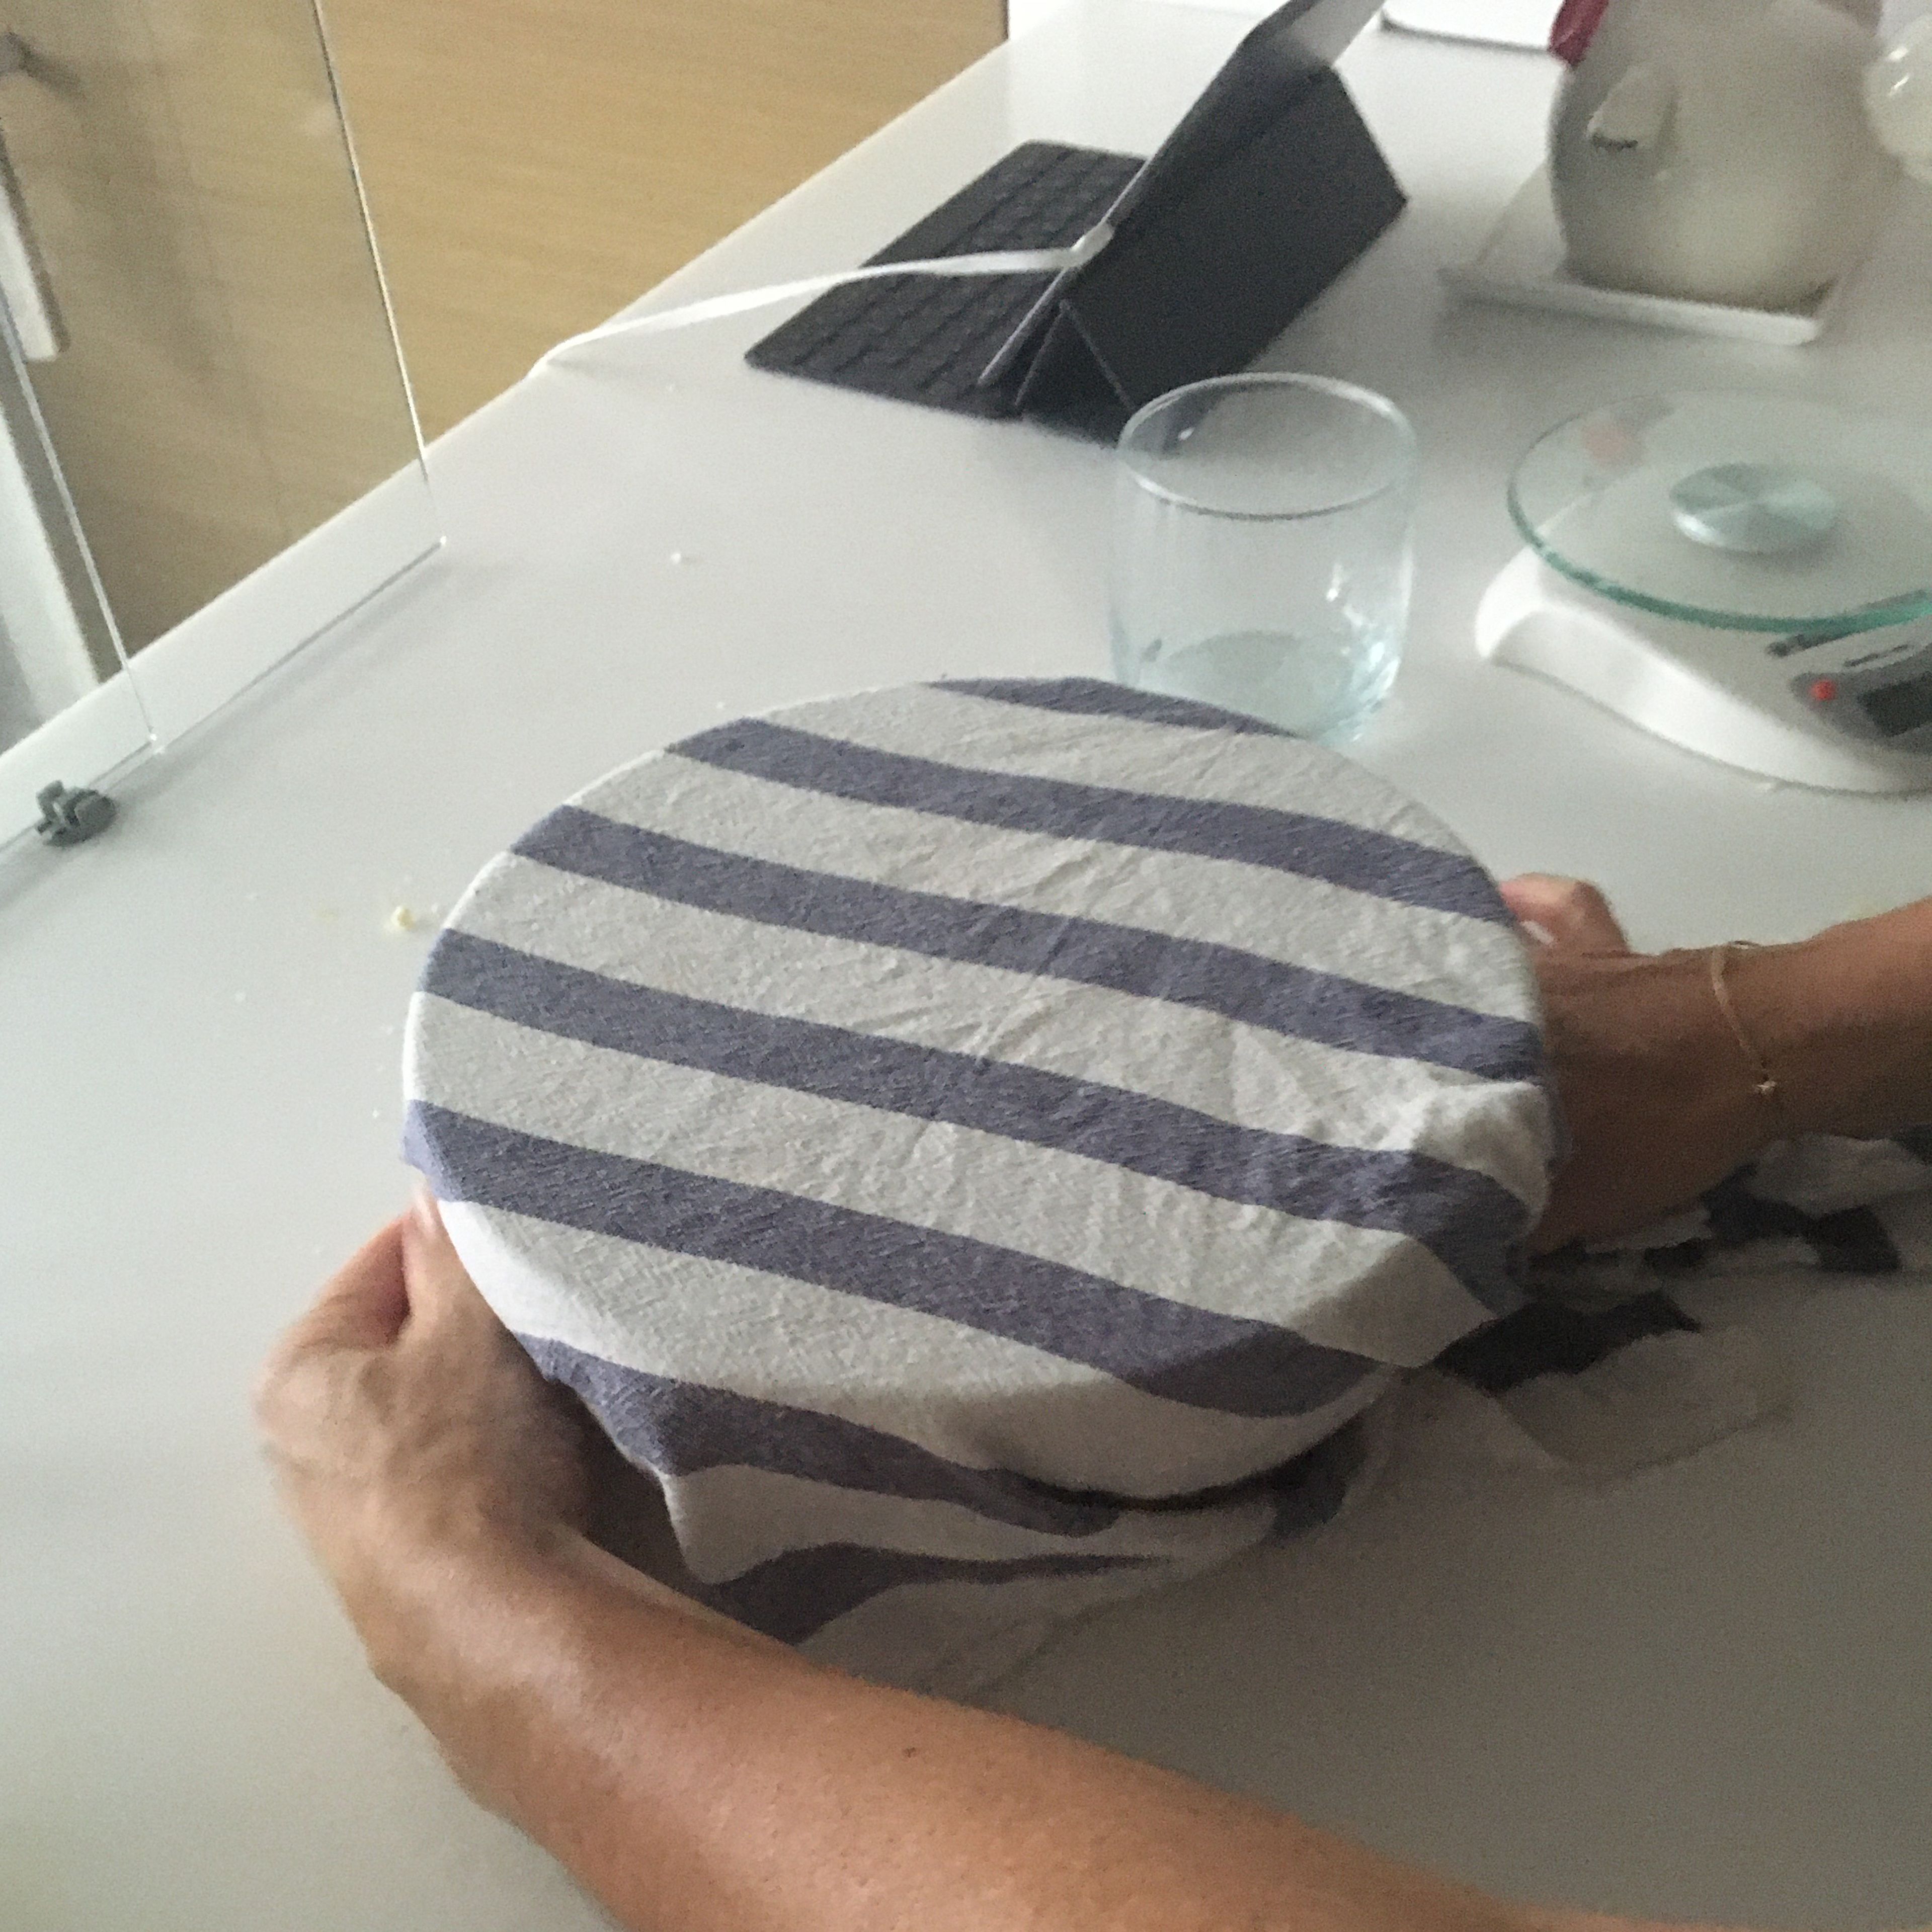 Wrap a towel around the bowl to help the rising of the yeast 